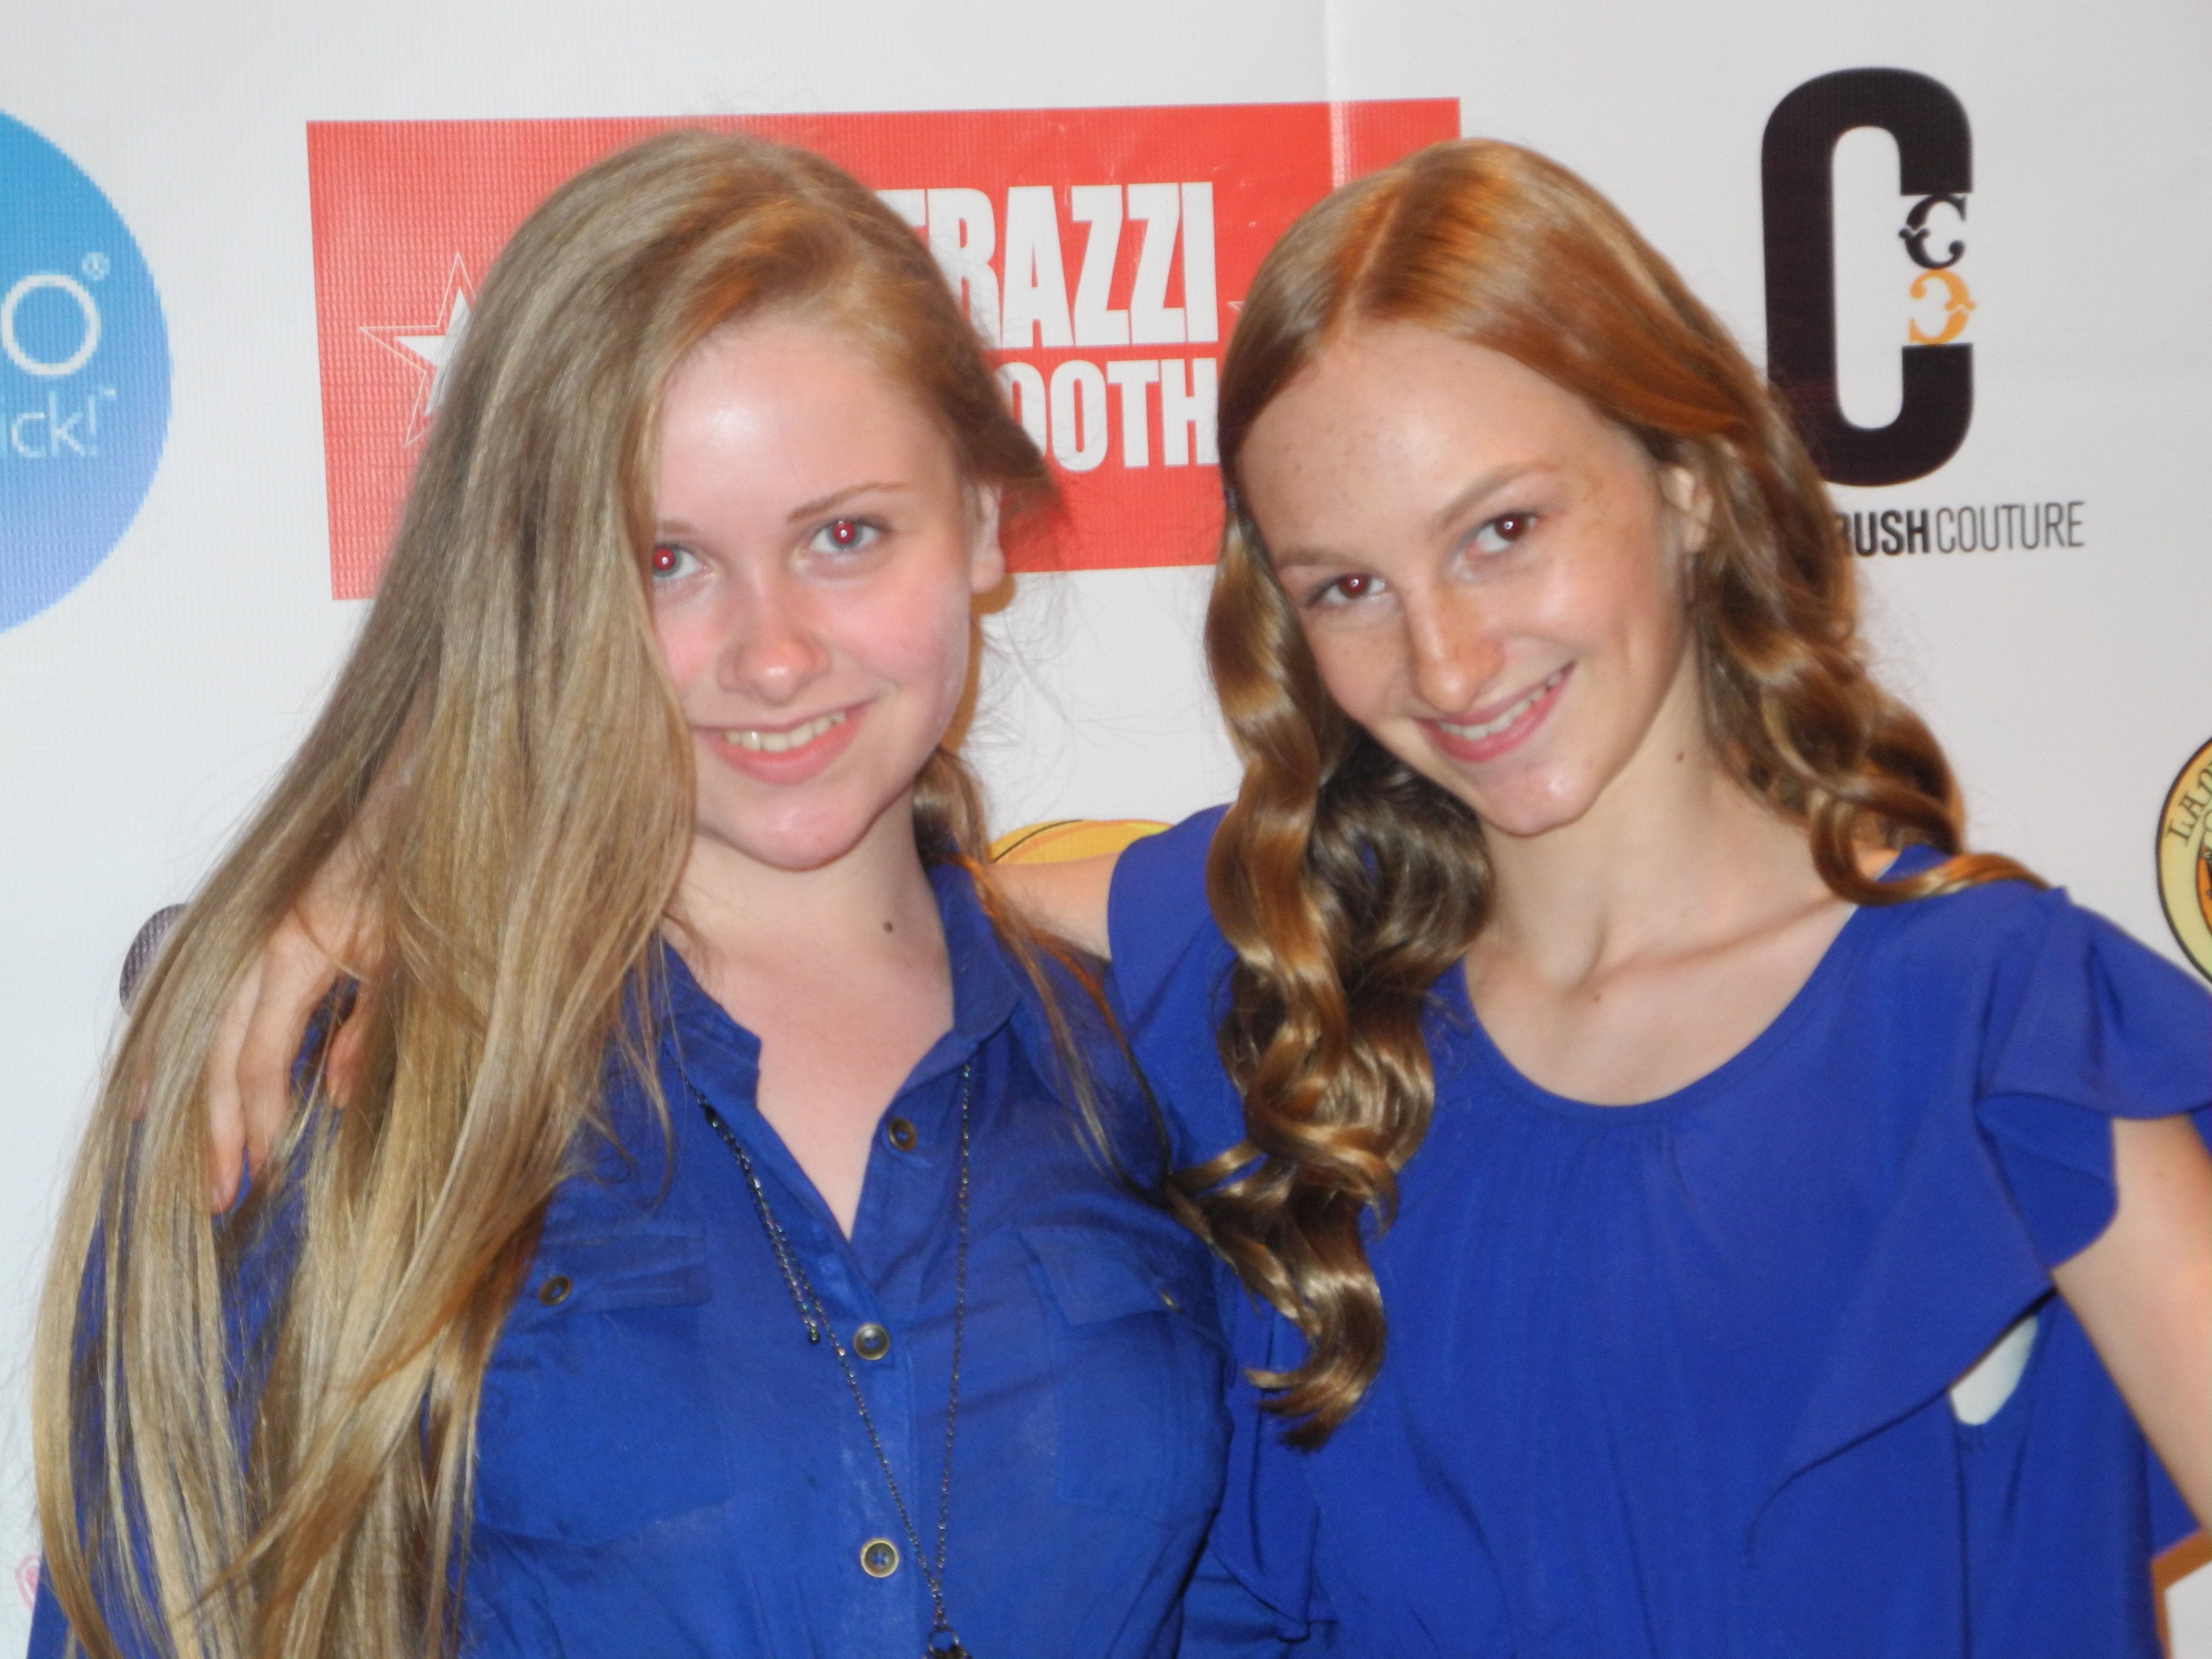 Kaitlin Morgan and Mikayla Chapman at the 2012 ASPCA charity event